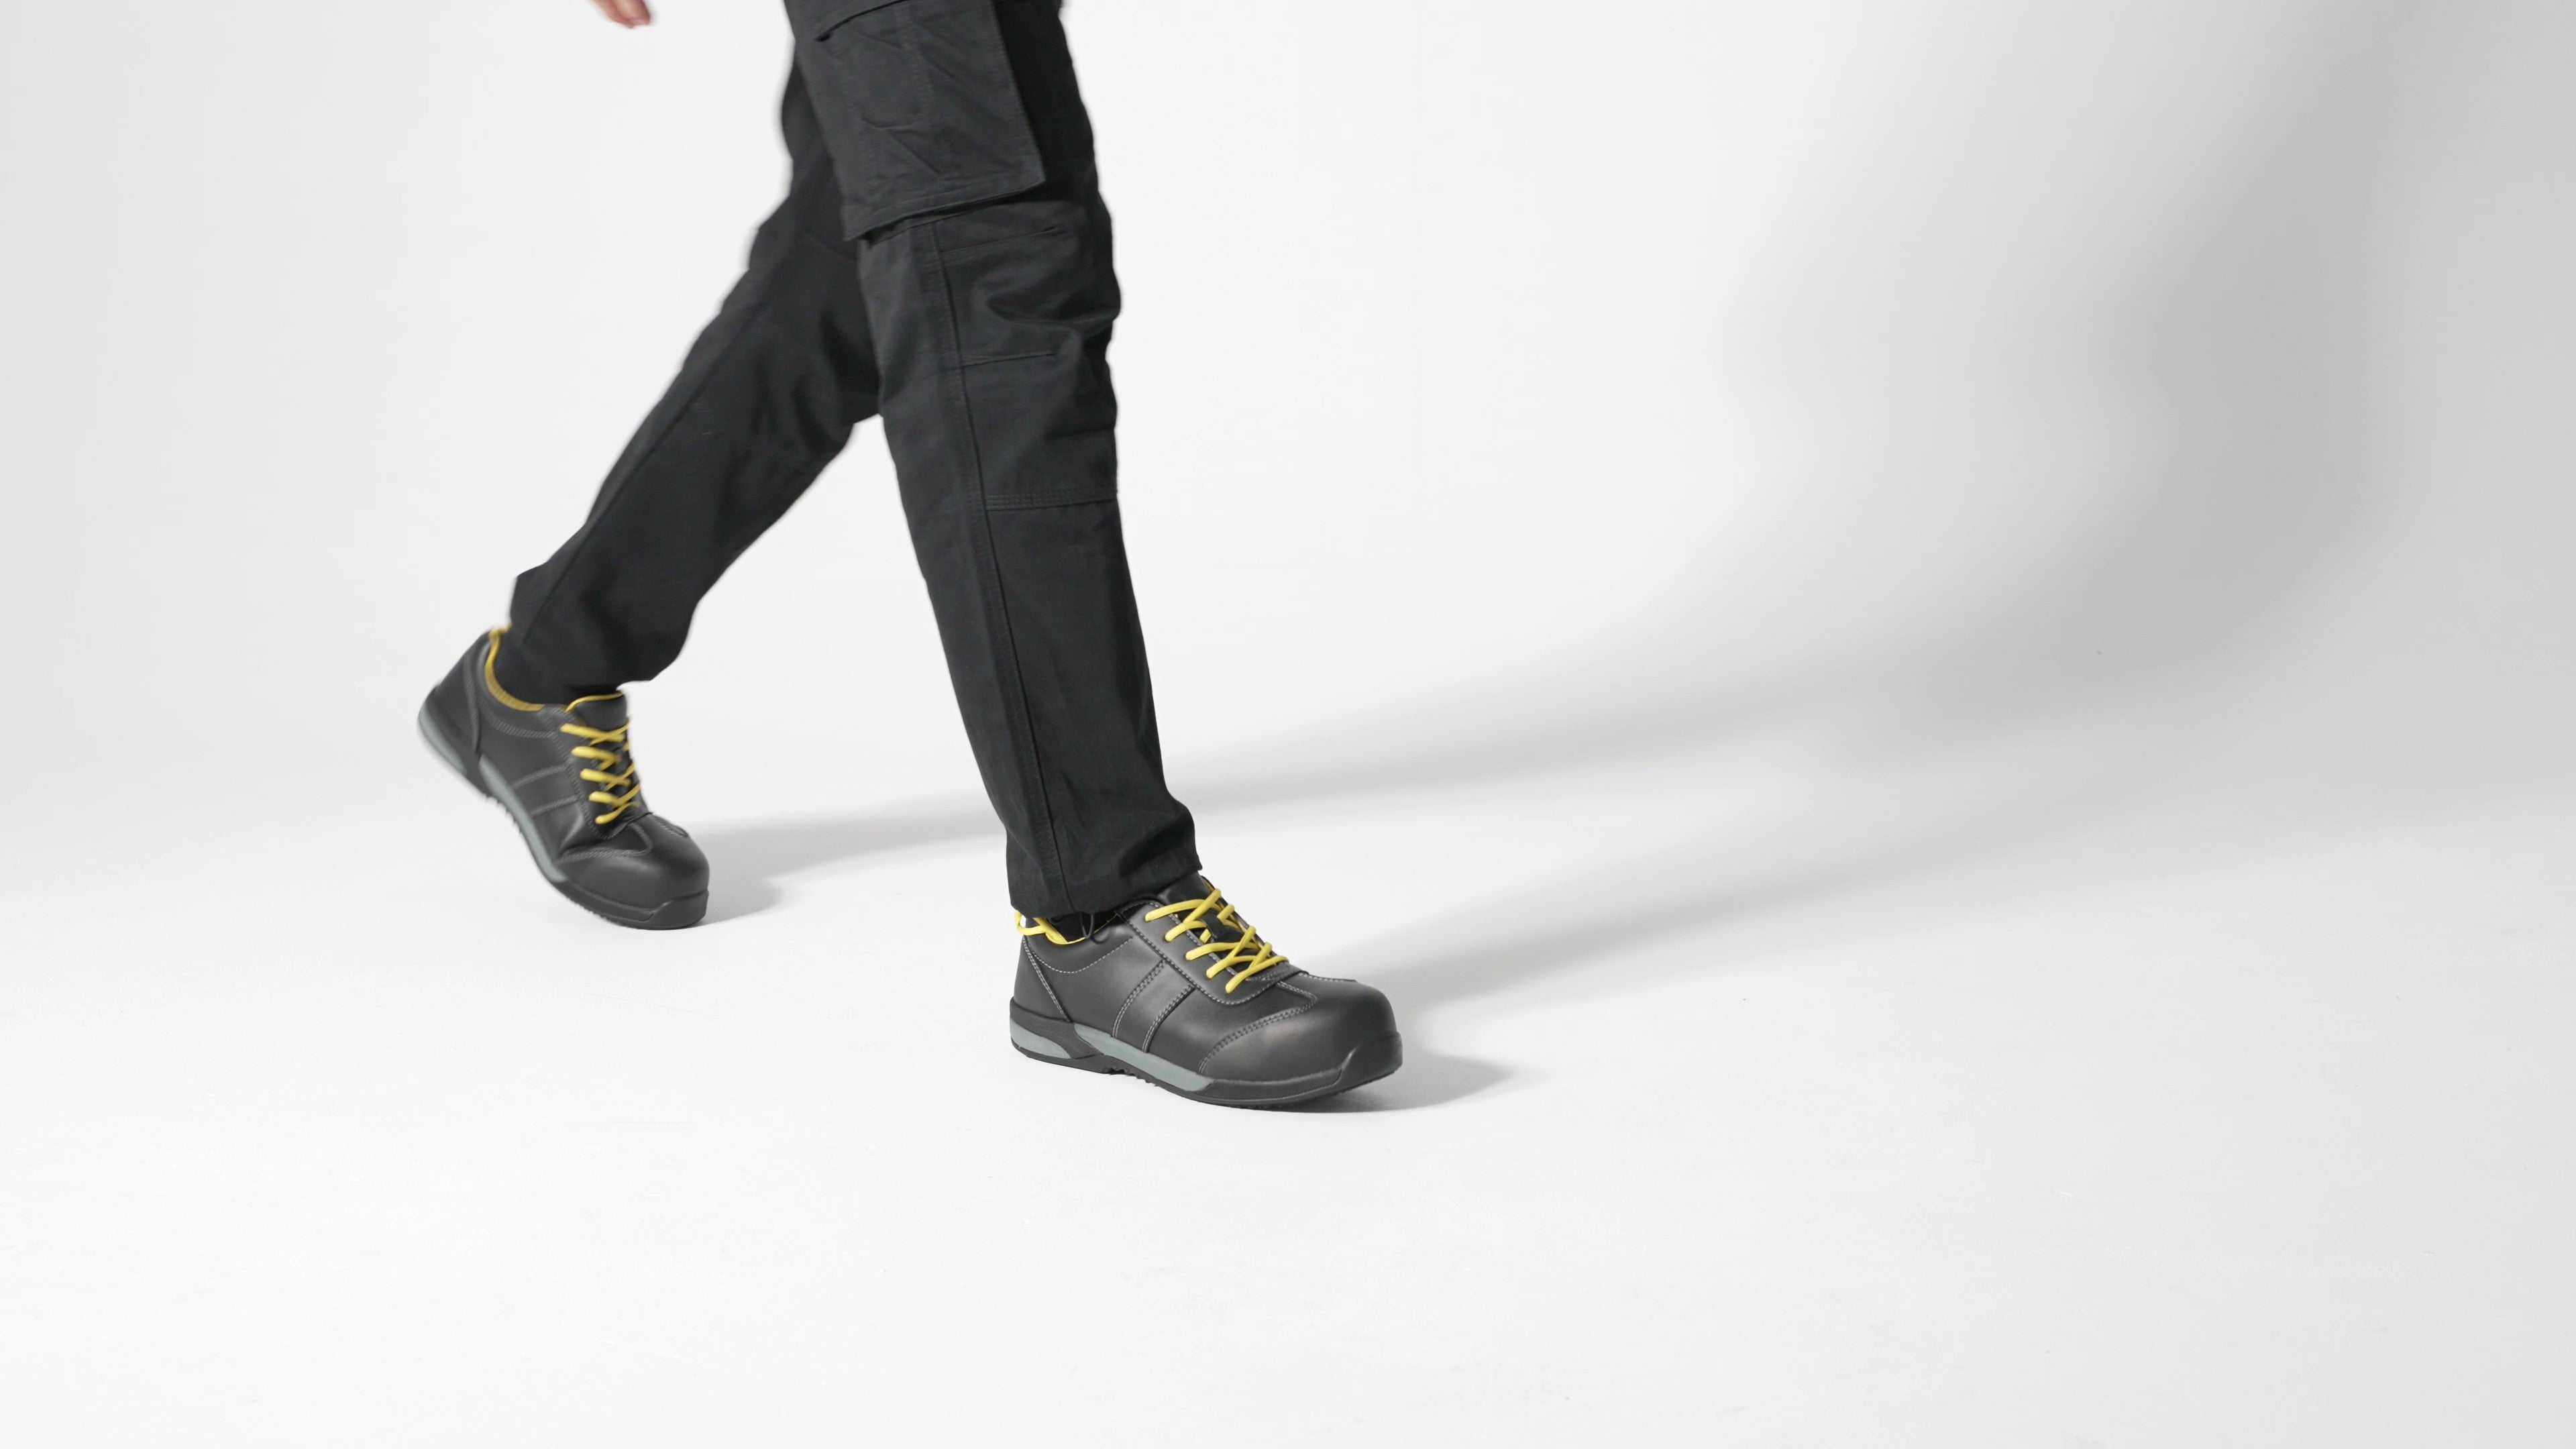 The Clyde from Shoes For Crews is a safety shoe with a slip-resistant sole, a waterproof and puncture-resistant upper and a nanocomposite toe cap (200 joules),  product video.